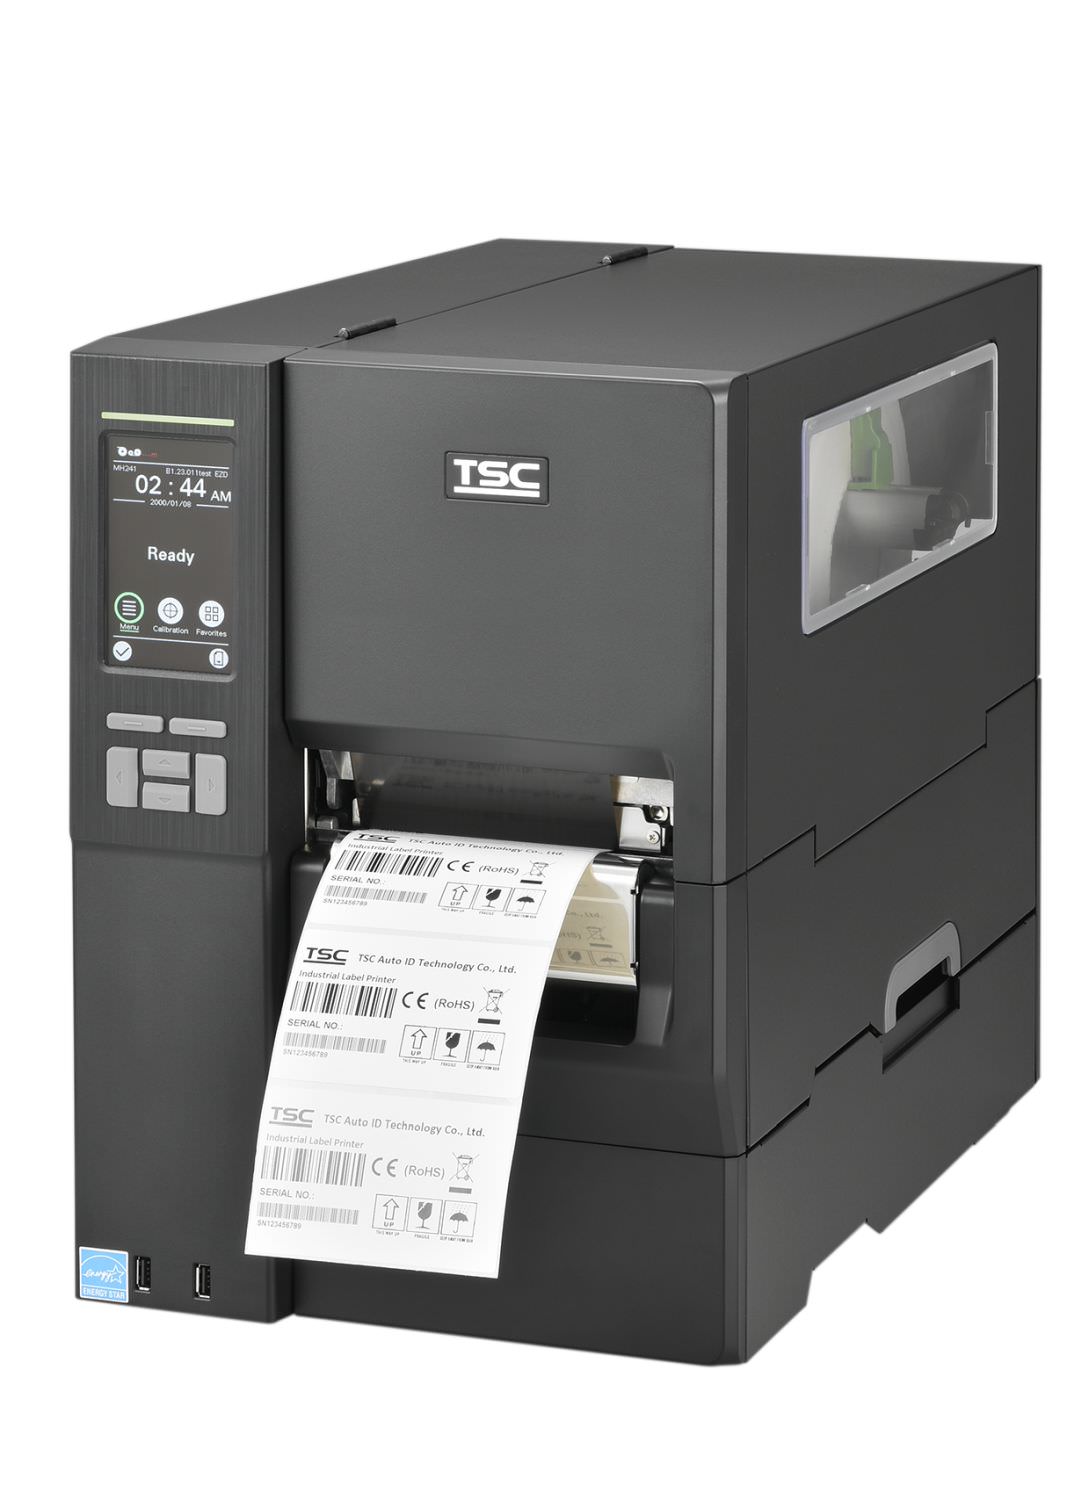 TSC MH241P, 8 Punkte/mm (203dpi), Rewinder, Disp., RTC, USB, RS232, Ethernet, MH241P-A001-0302